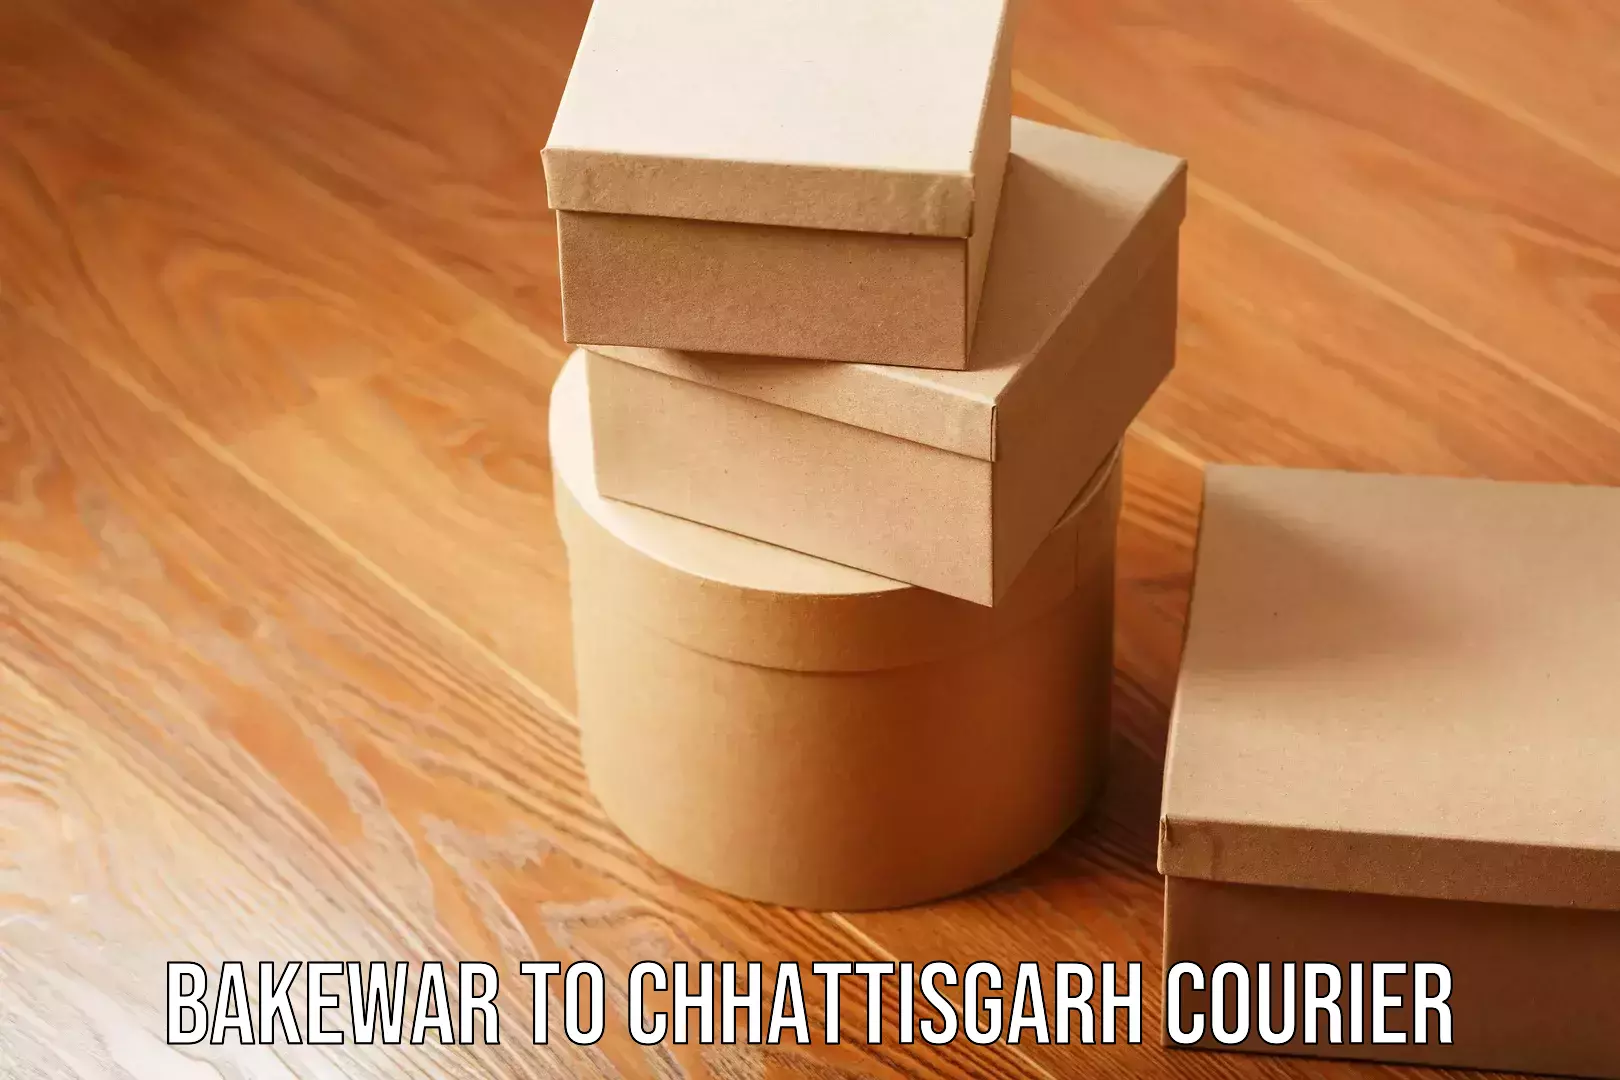 24-hour delivery options Bakewar to Chhattisgarh